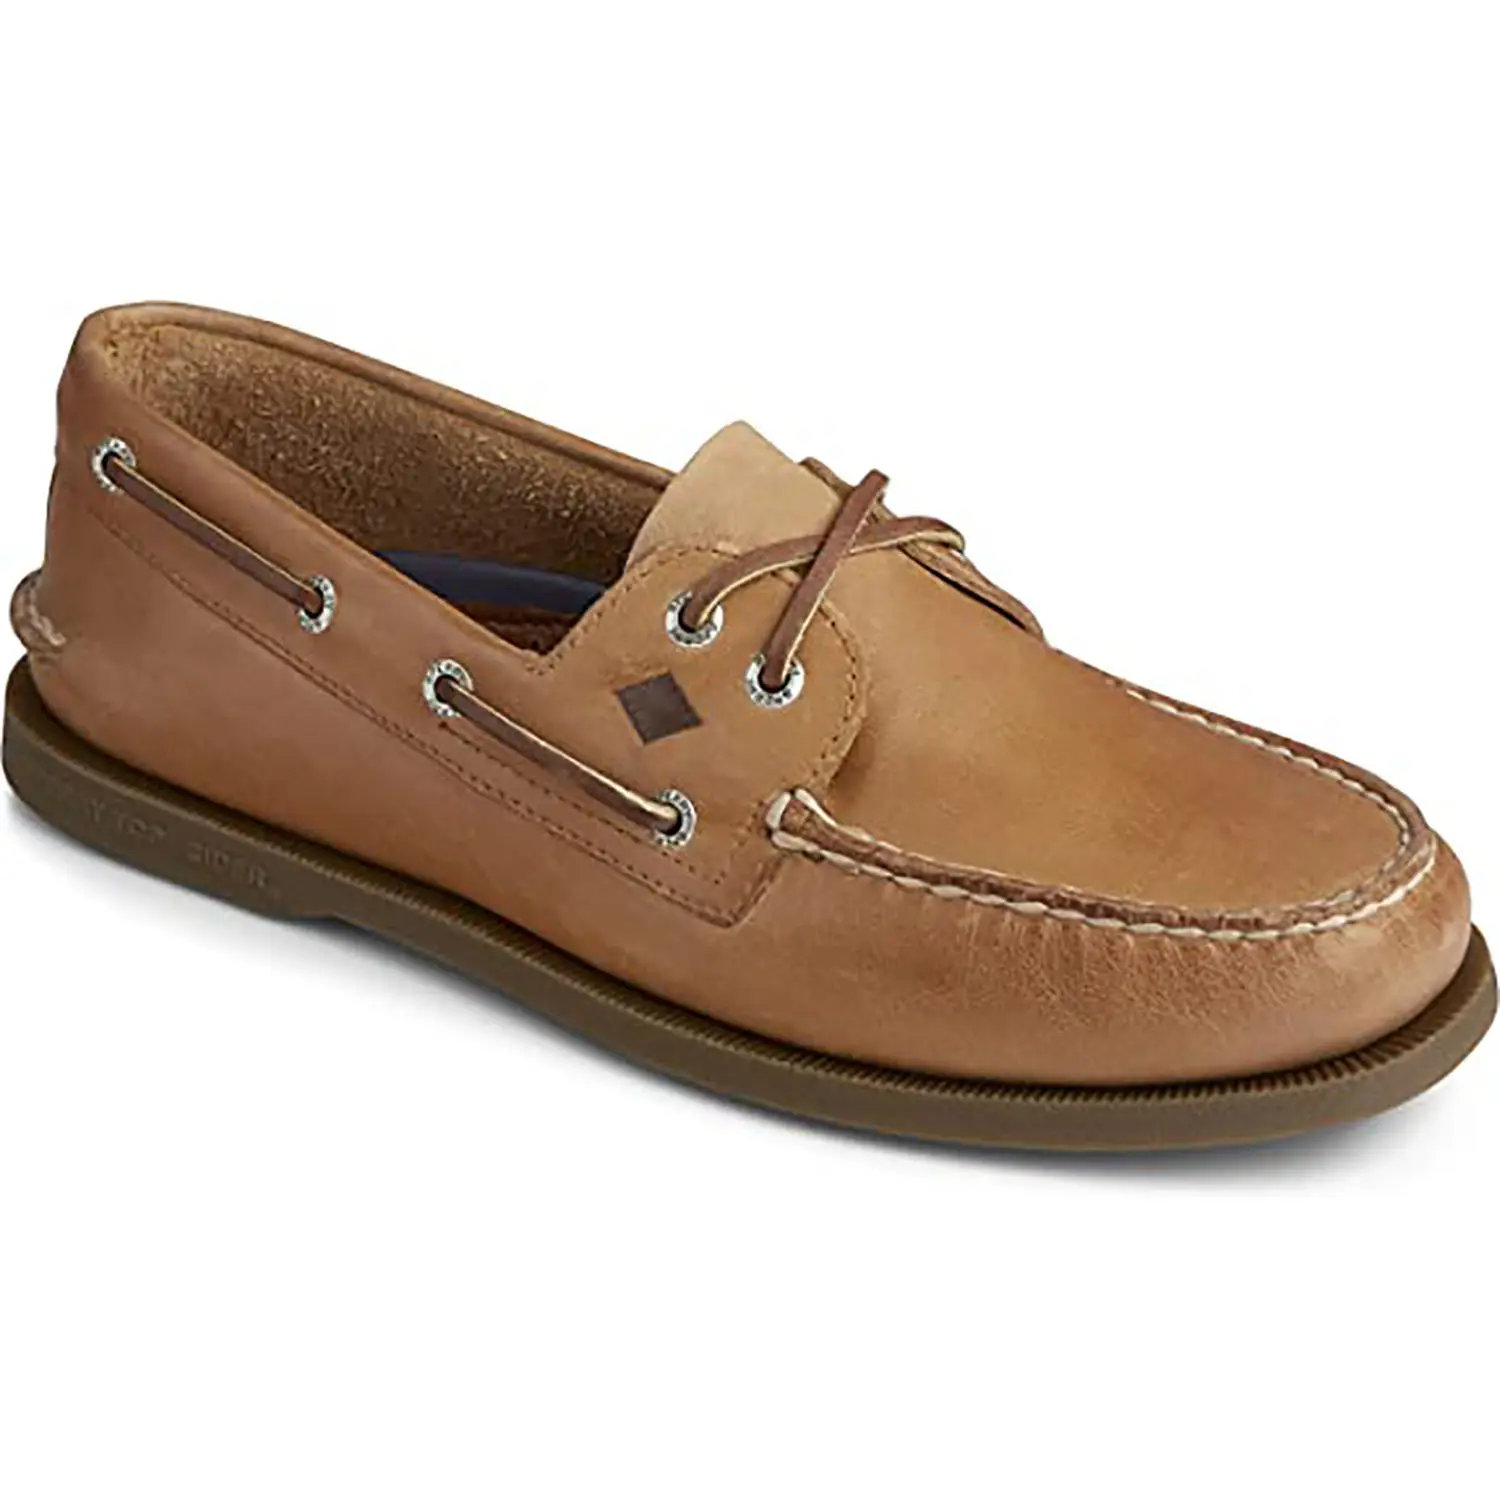 Mens classic male fashion casual brown Genuine leather men's boat shoes